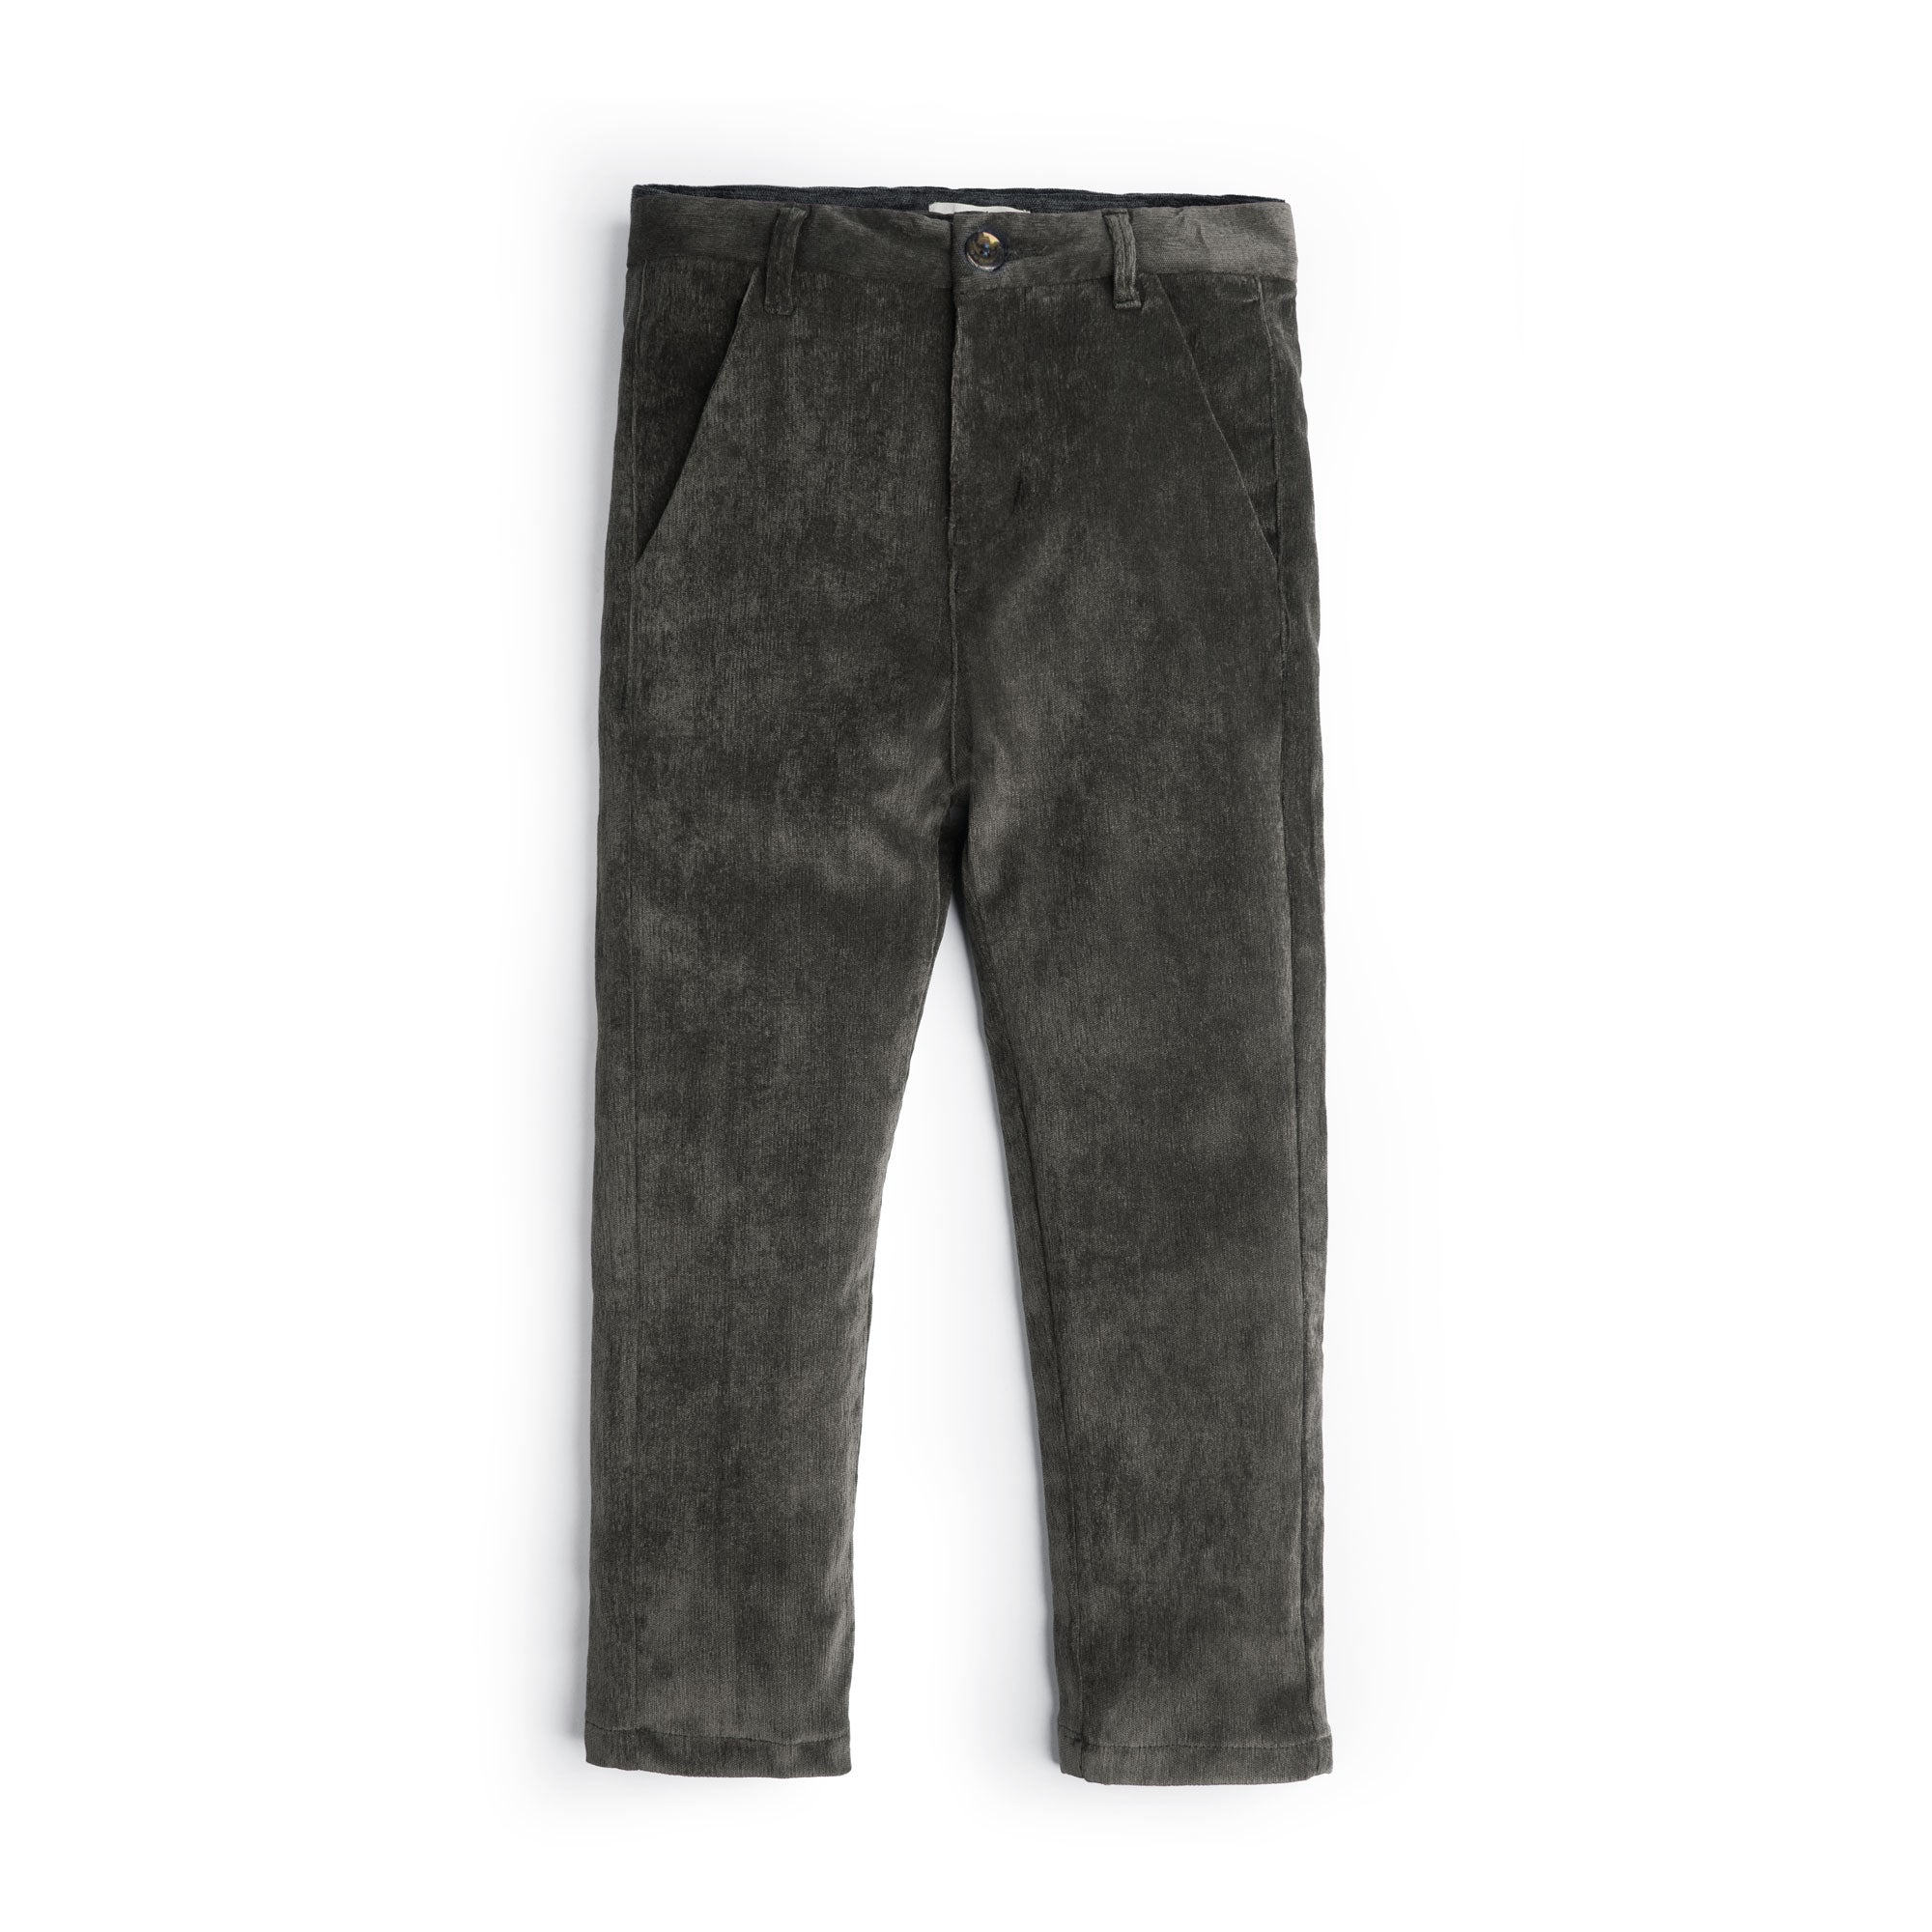 Charcoal Buttoned Pant